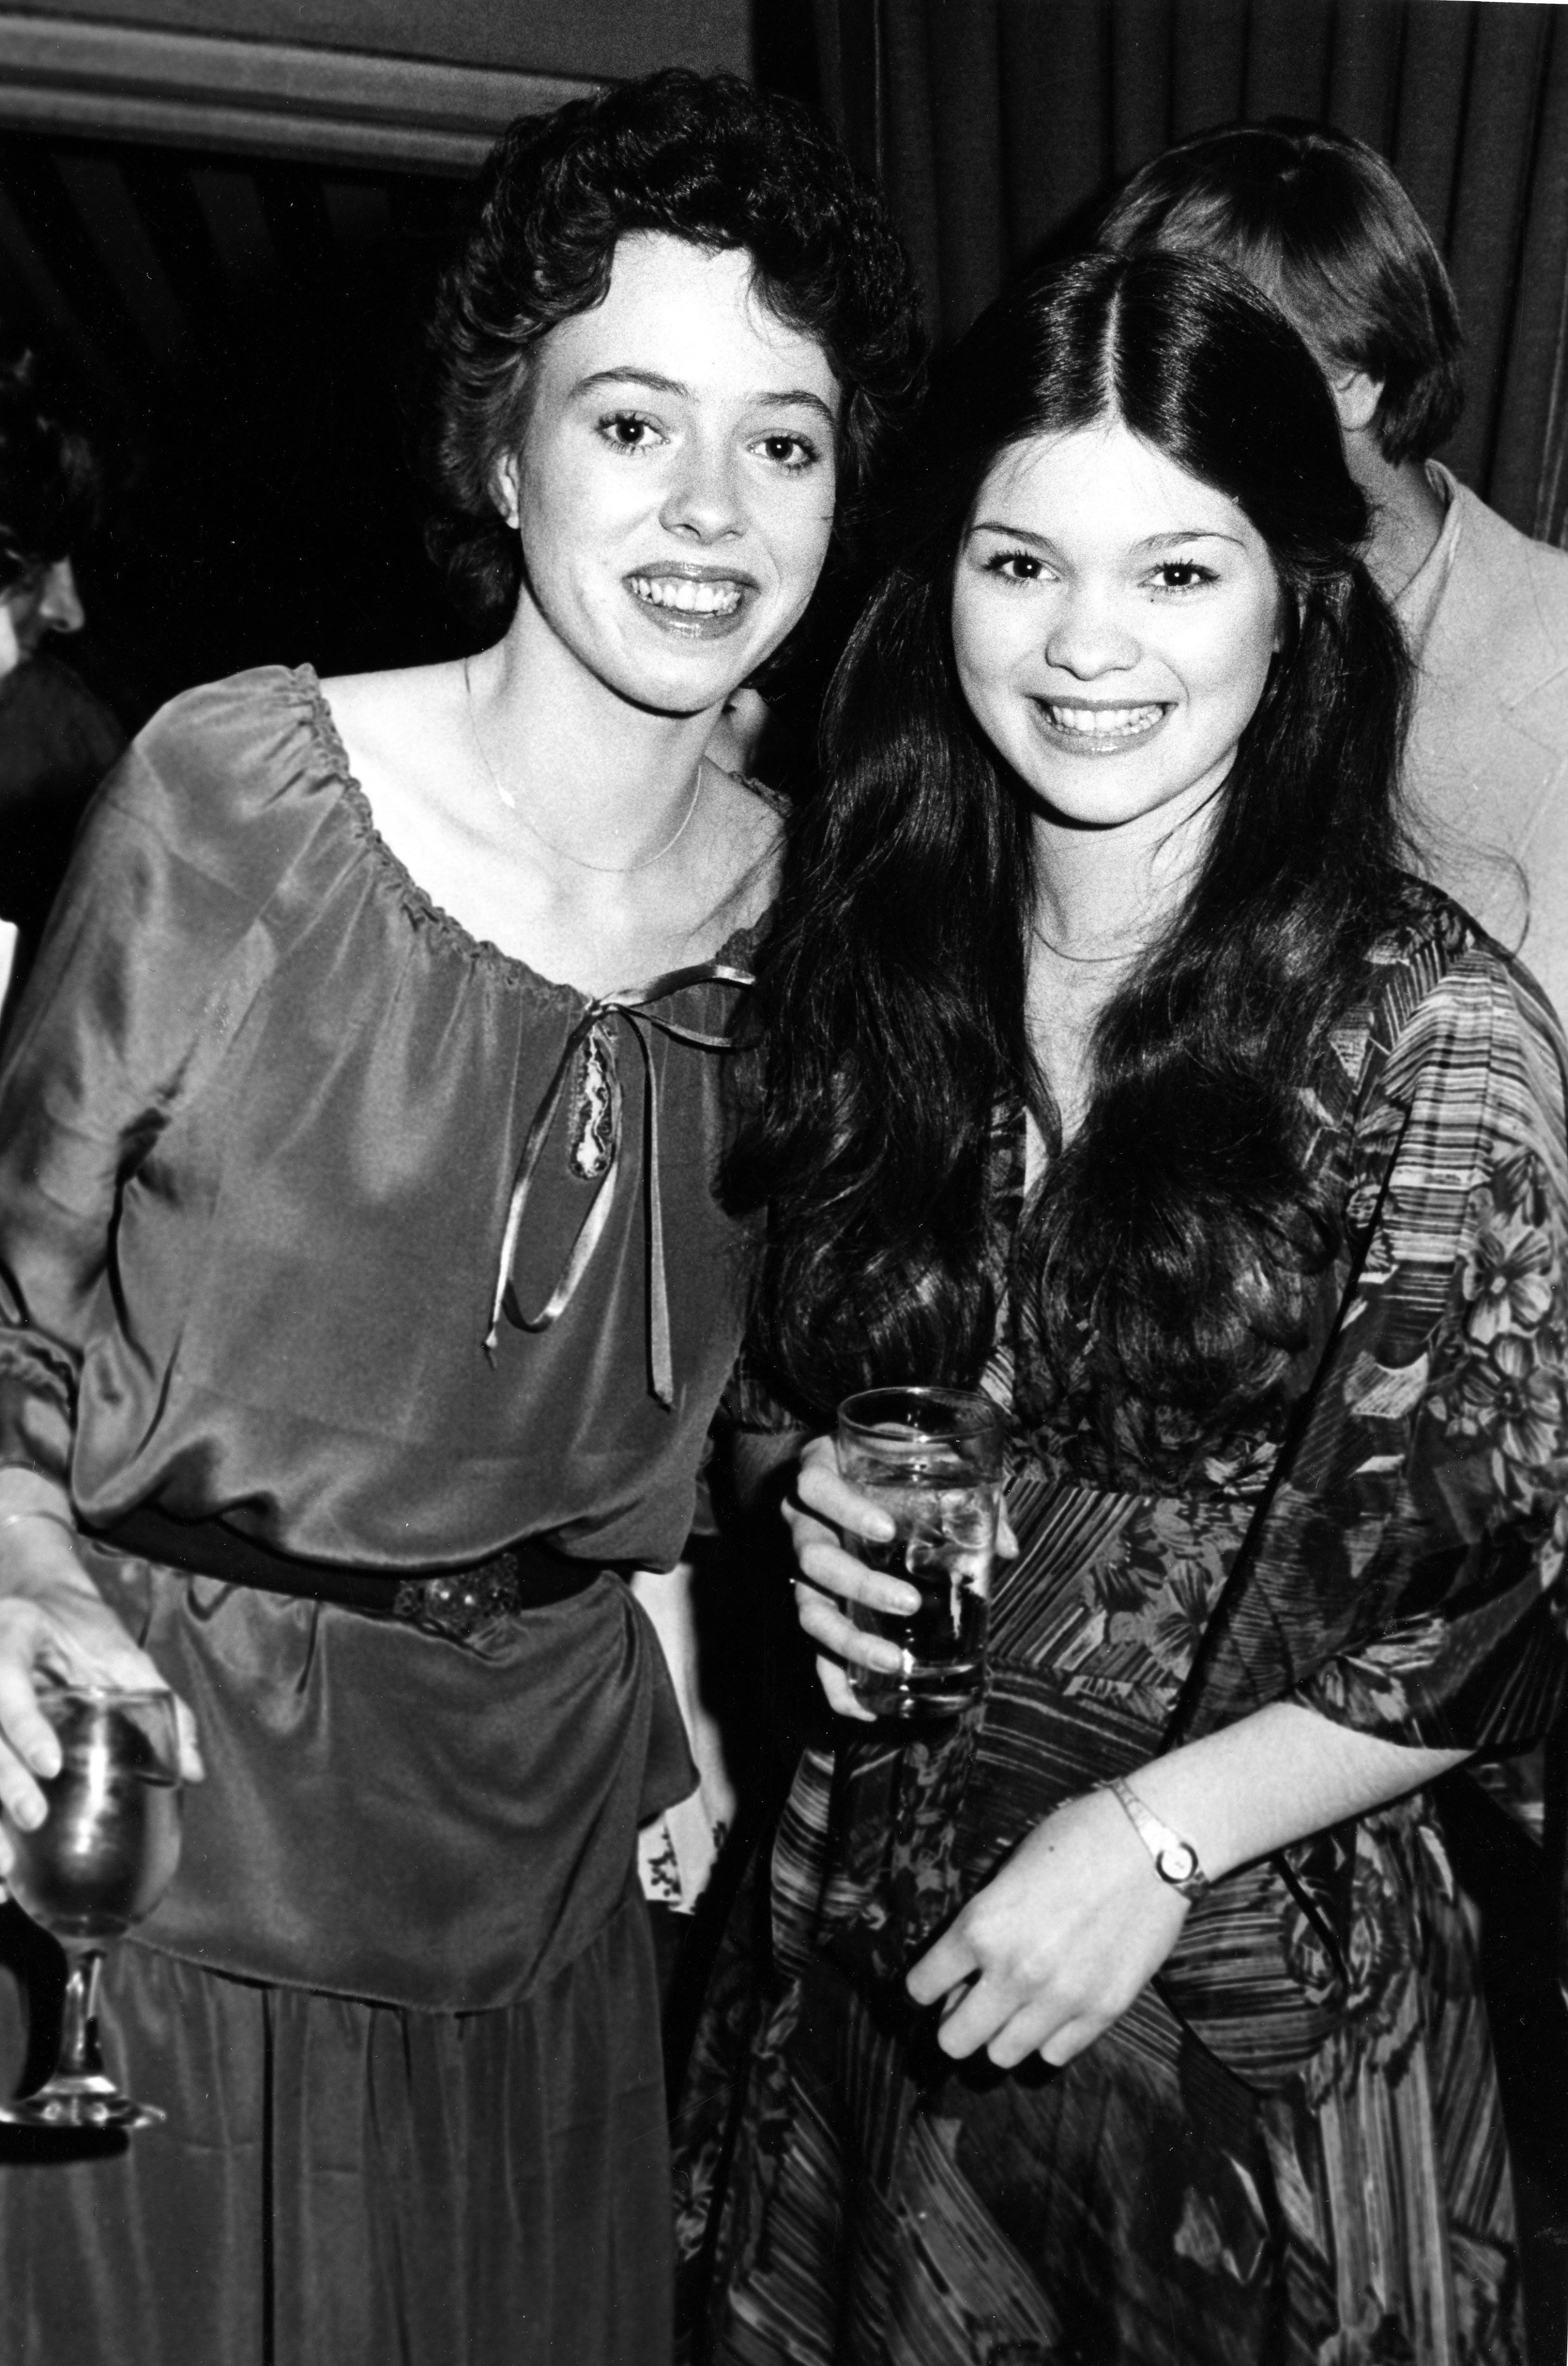 Actresses and co-stars of the TV show "One Day At A Time" Mackenzie Phillips and Valerie Bertinelli attend an event in circa 1978. | Source: Getty Images